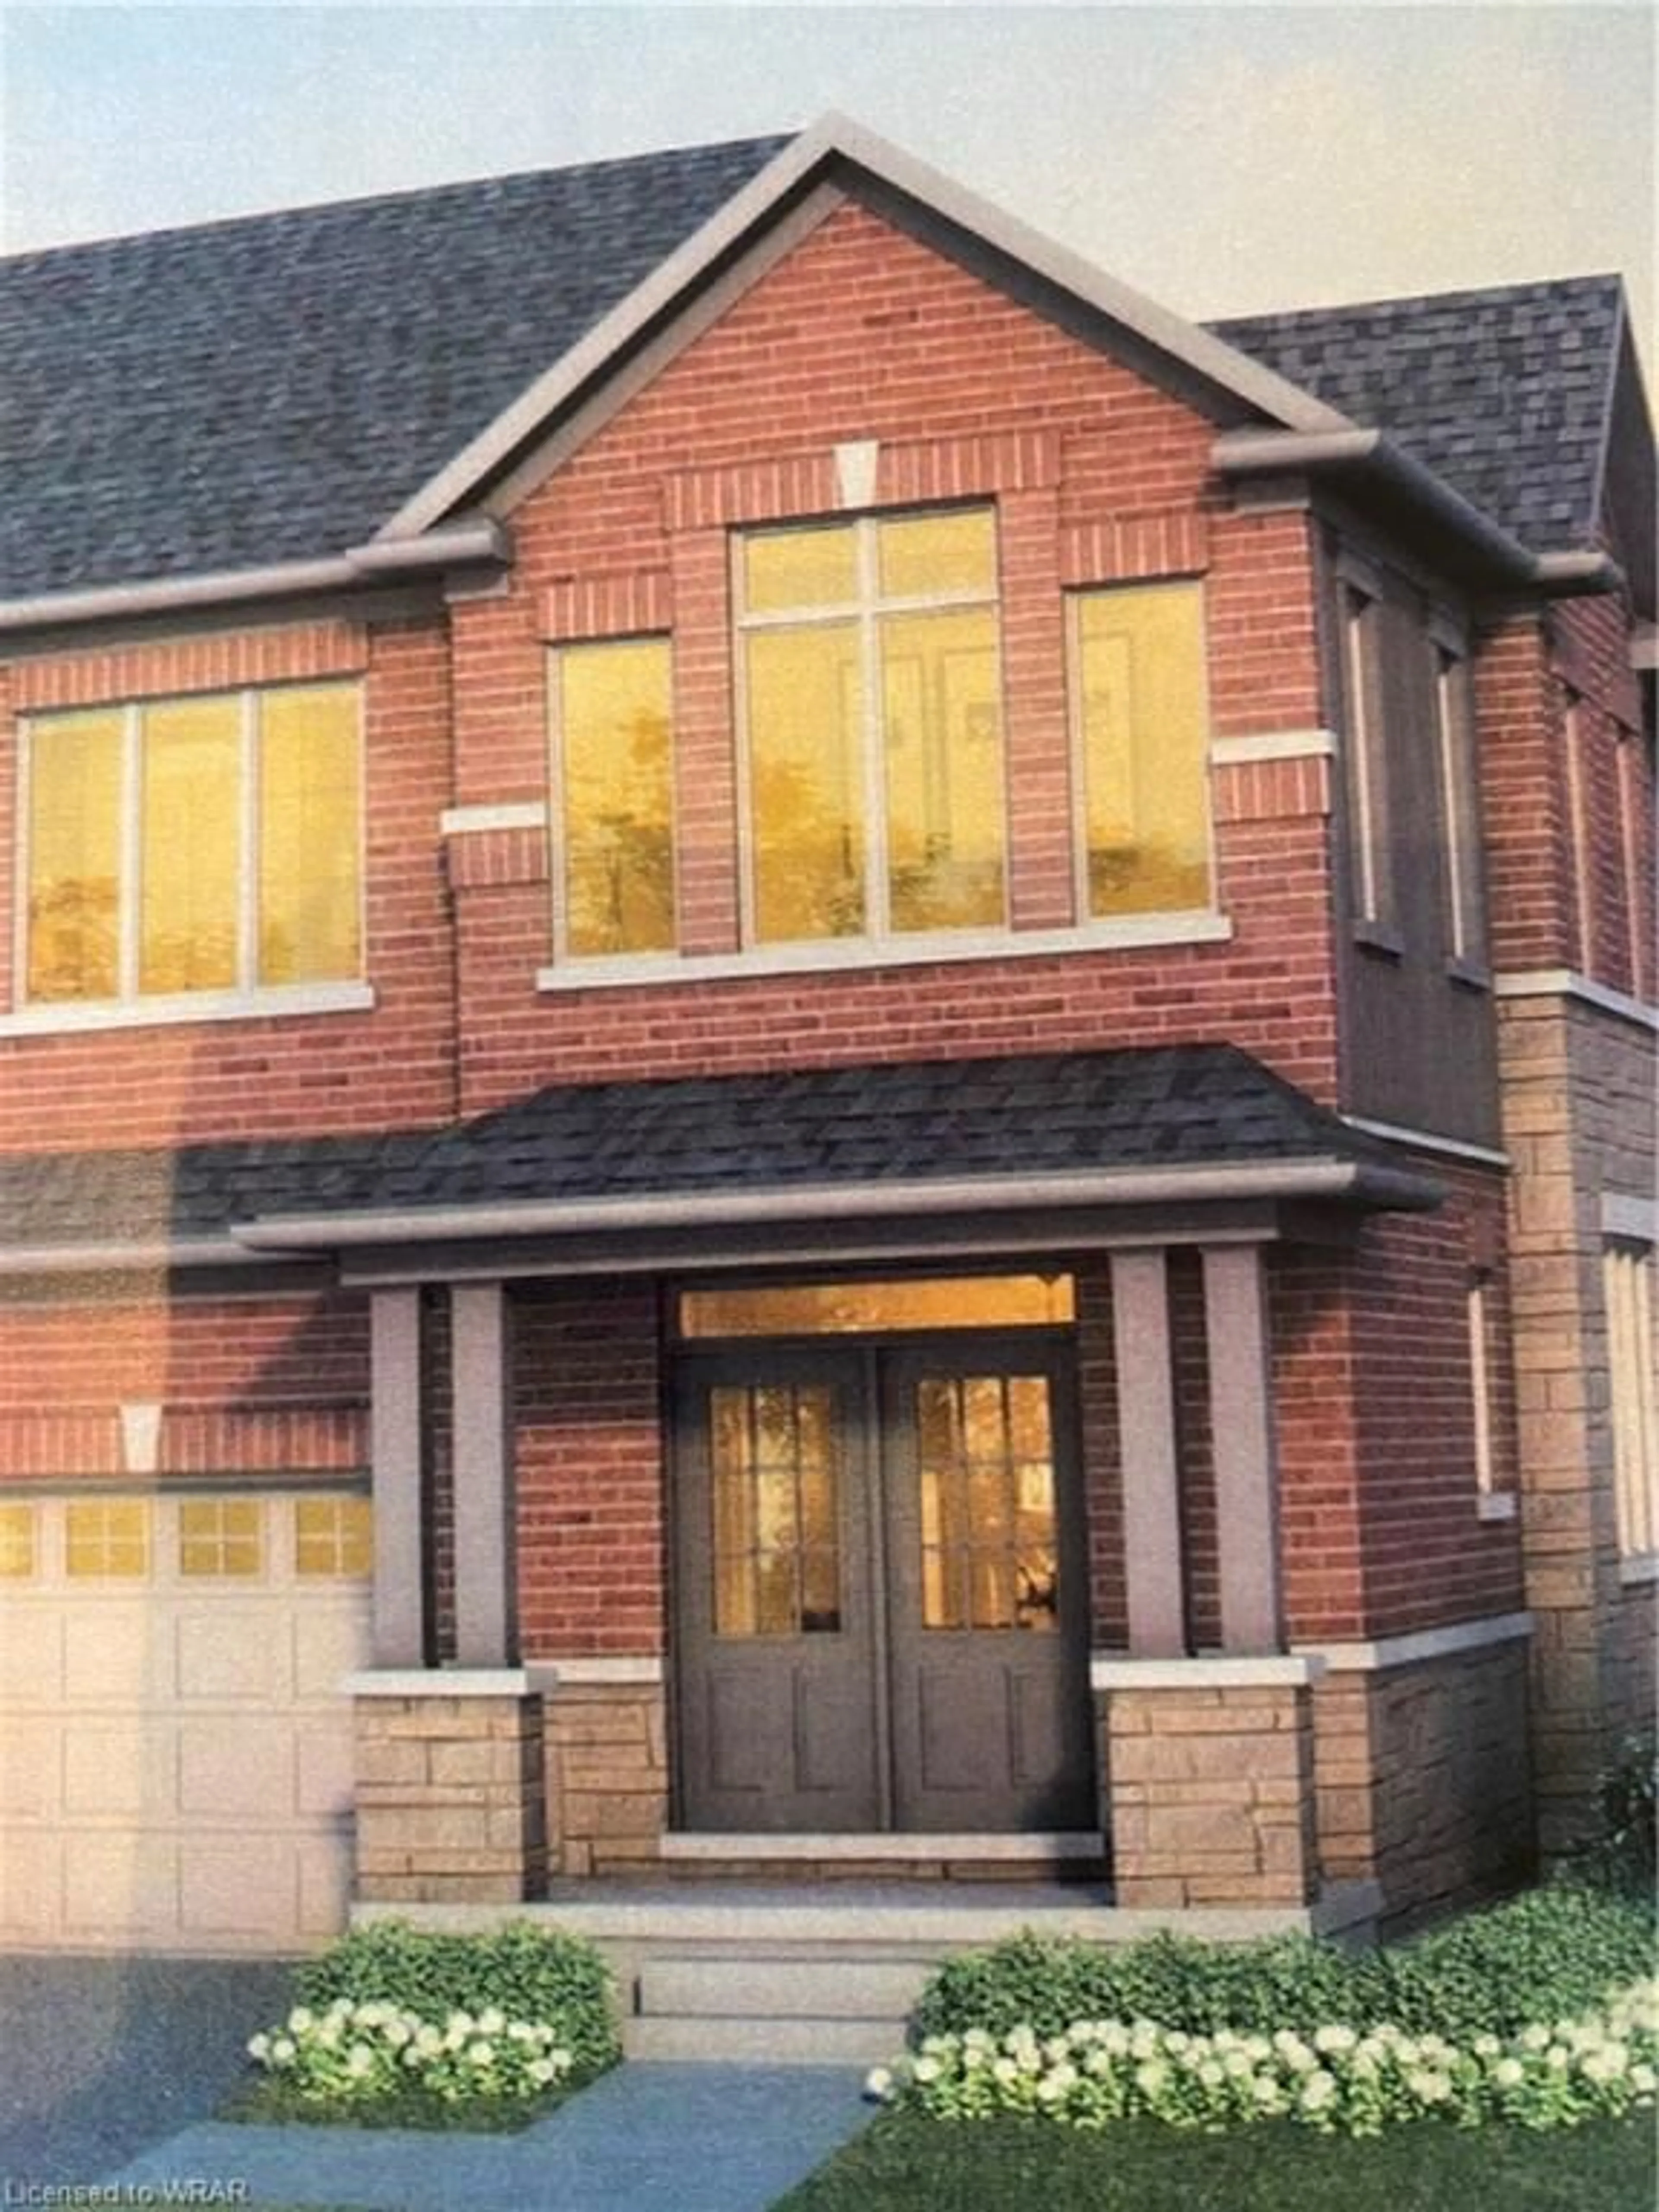 Home with brick exterior material for LOT 35 Robert Woolner St, Ayr Ontario N0B 1E0